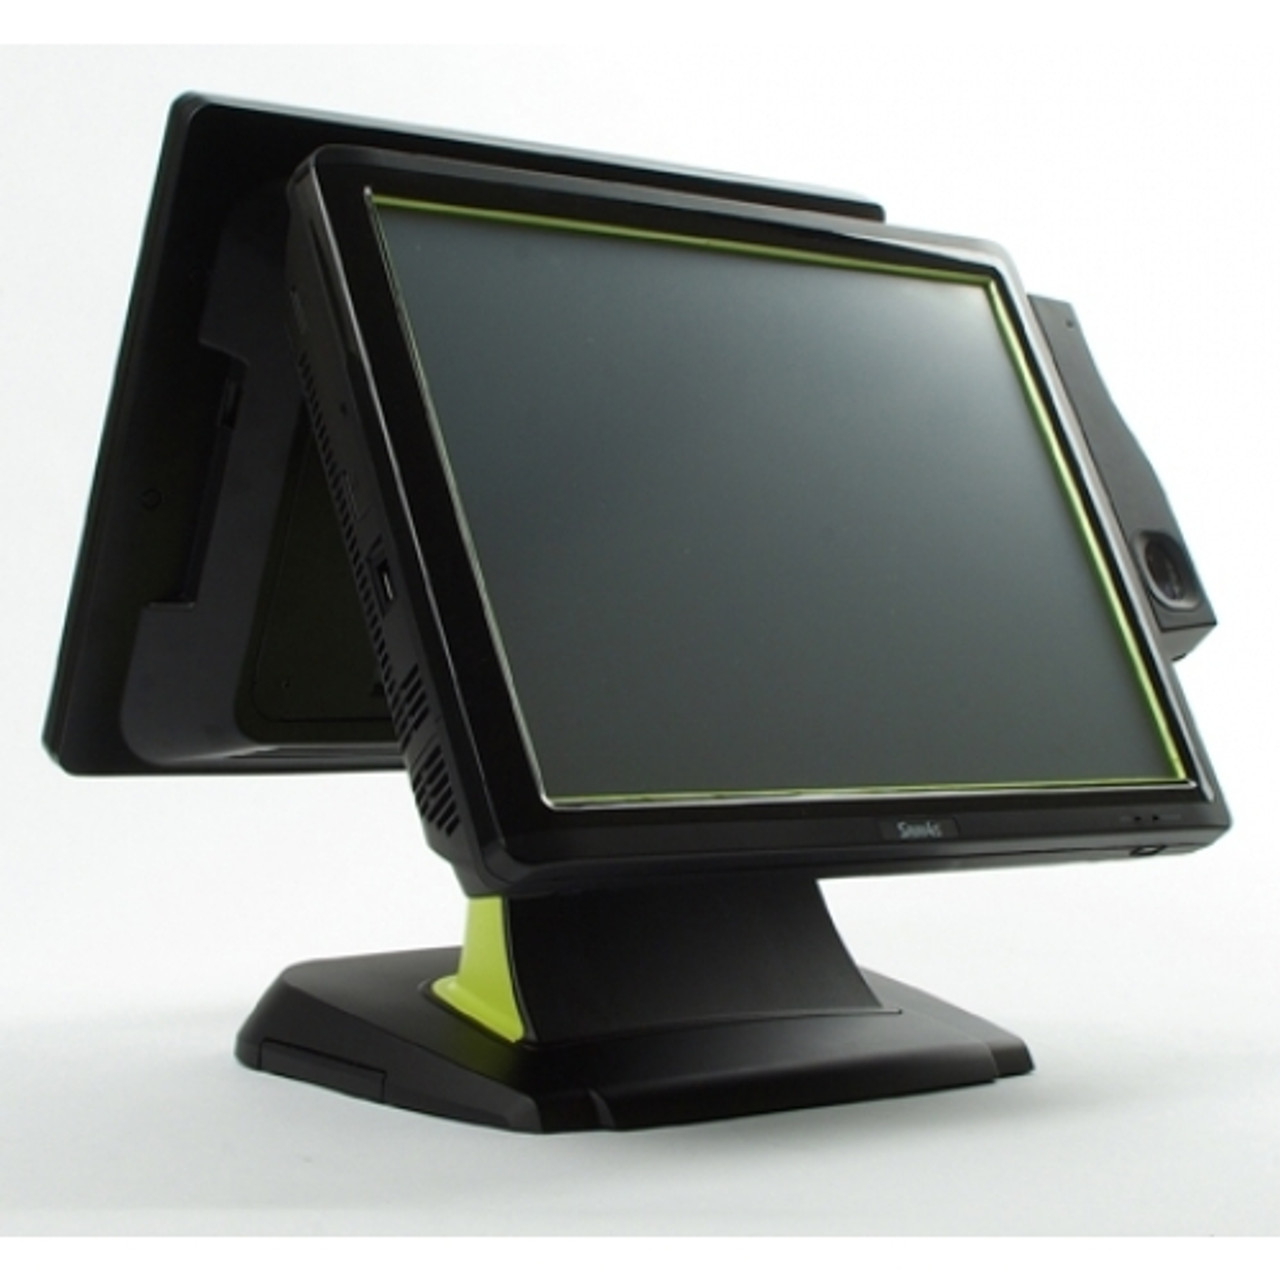 SAM4s 15" Rear POS Display for SPT-4700